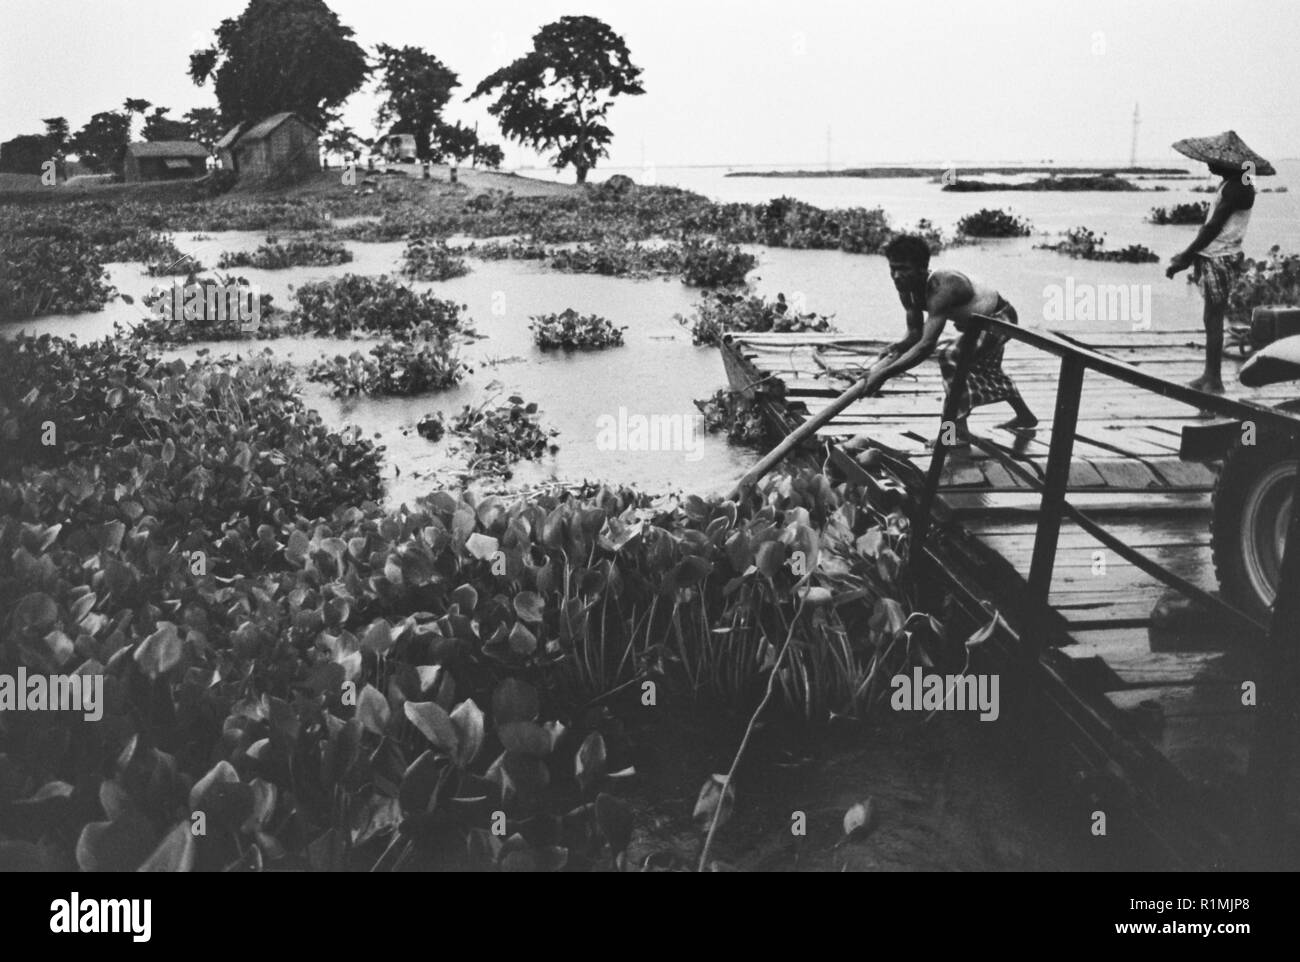 Clearing water hyacinth to get vehicle ferry over Lake Tamabil. 1980 Stock Photo